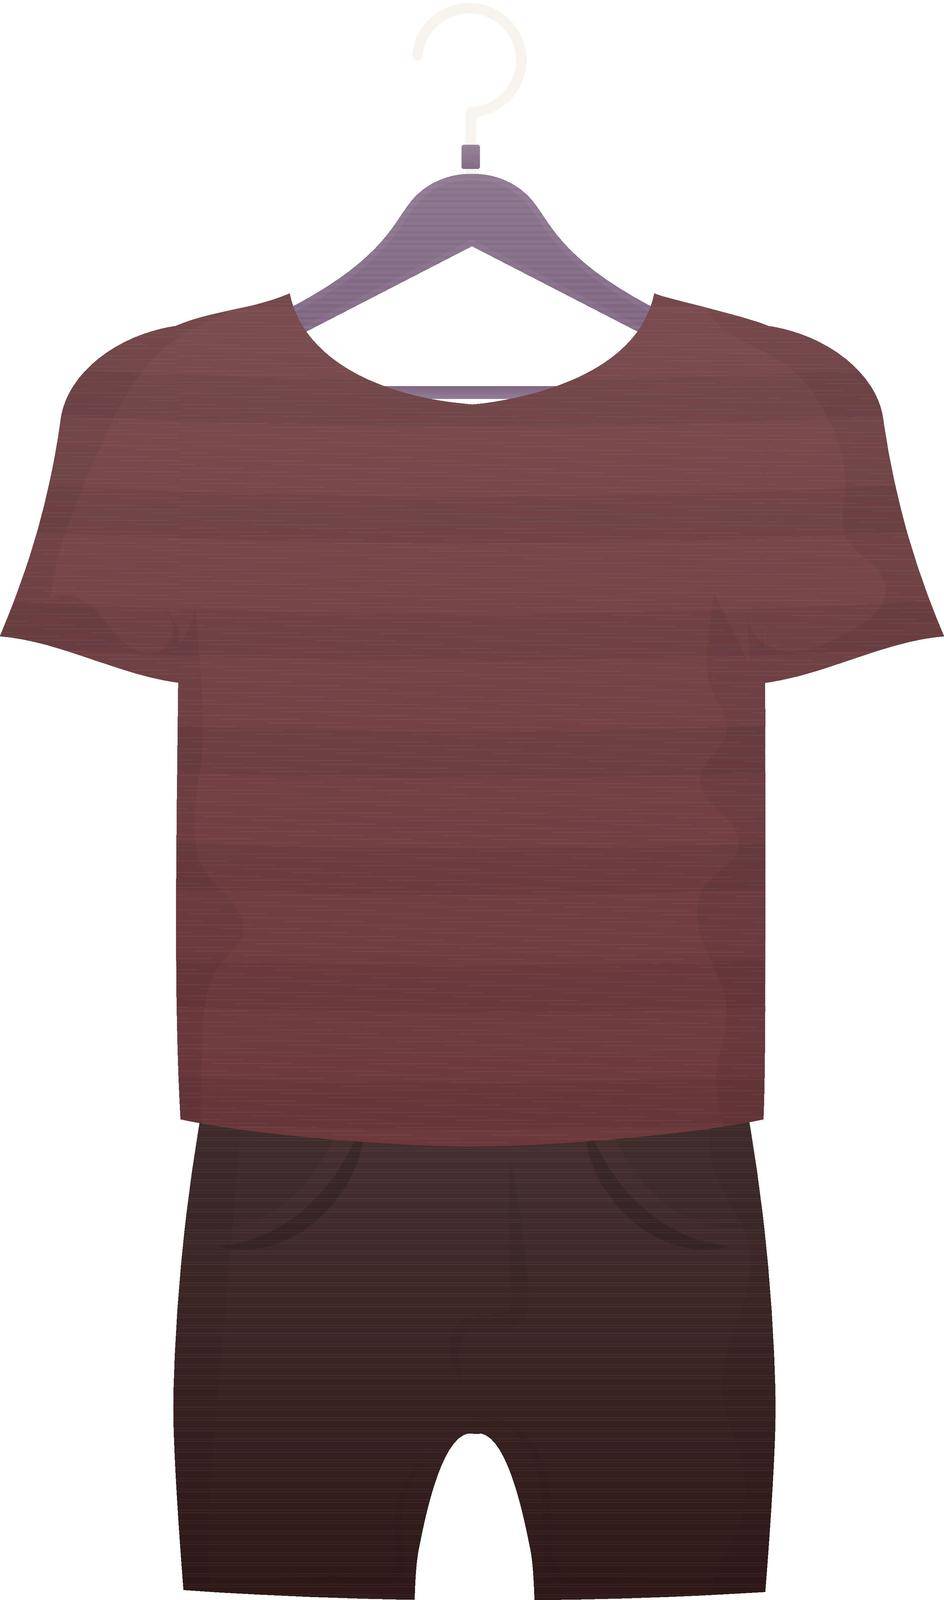 T-shirt and shorts. A set of children's clothes for a boy. Isolated. Cartoon style. Vector illustration.